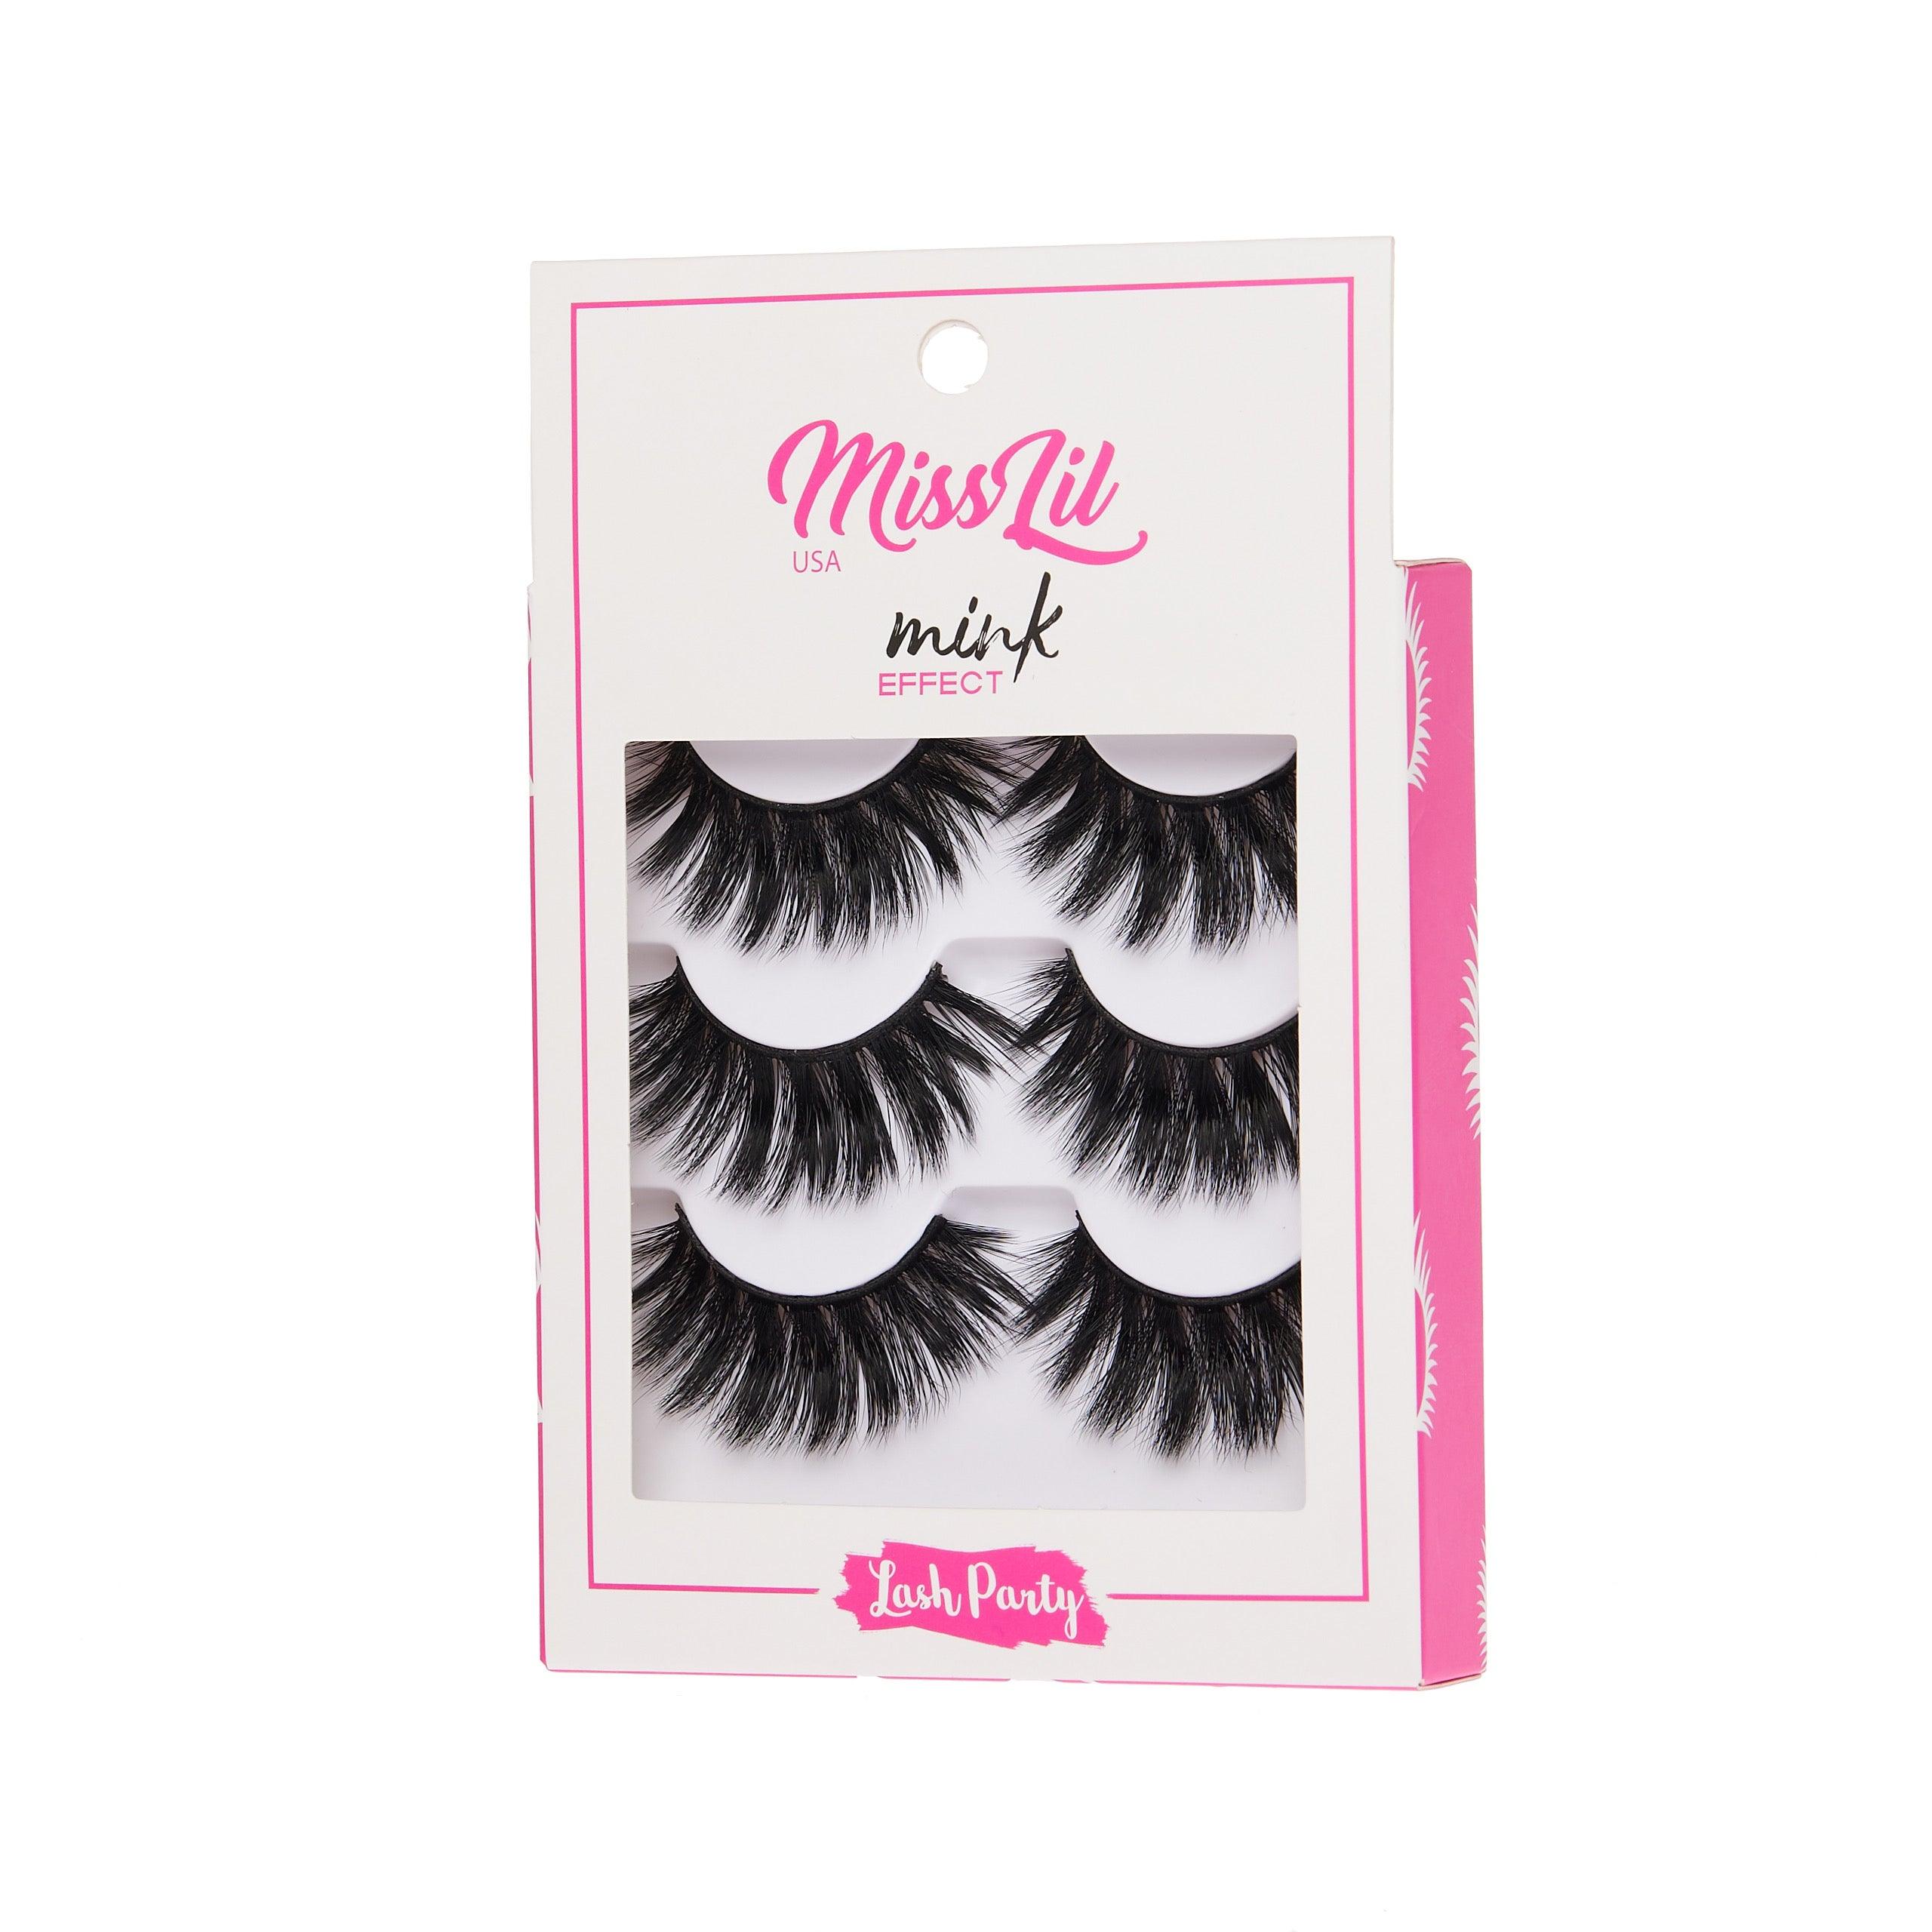 3-Pair Faux Mink Effect Eyelashes - Lash Party Collection #27 - Pack of 3 - Miss Lil USA